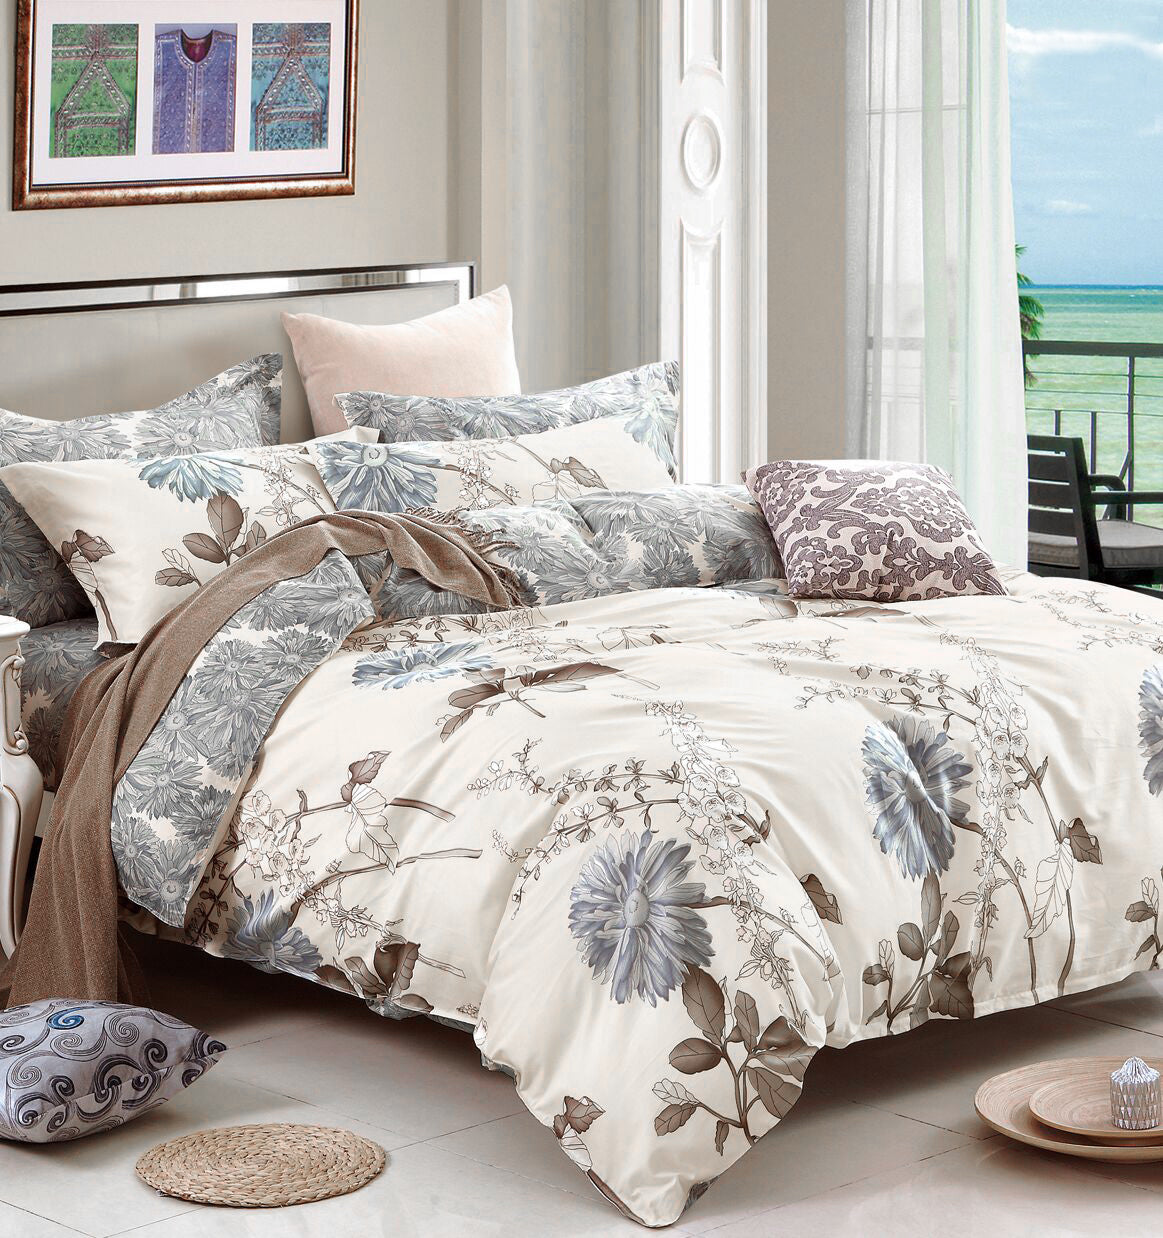 Swanson Beddings Daisy Floral Comforter Set: Comforter and and Pillow Shams 100% Cotton Shell